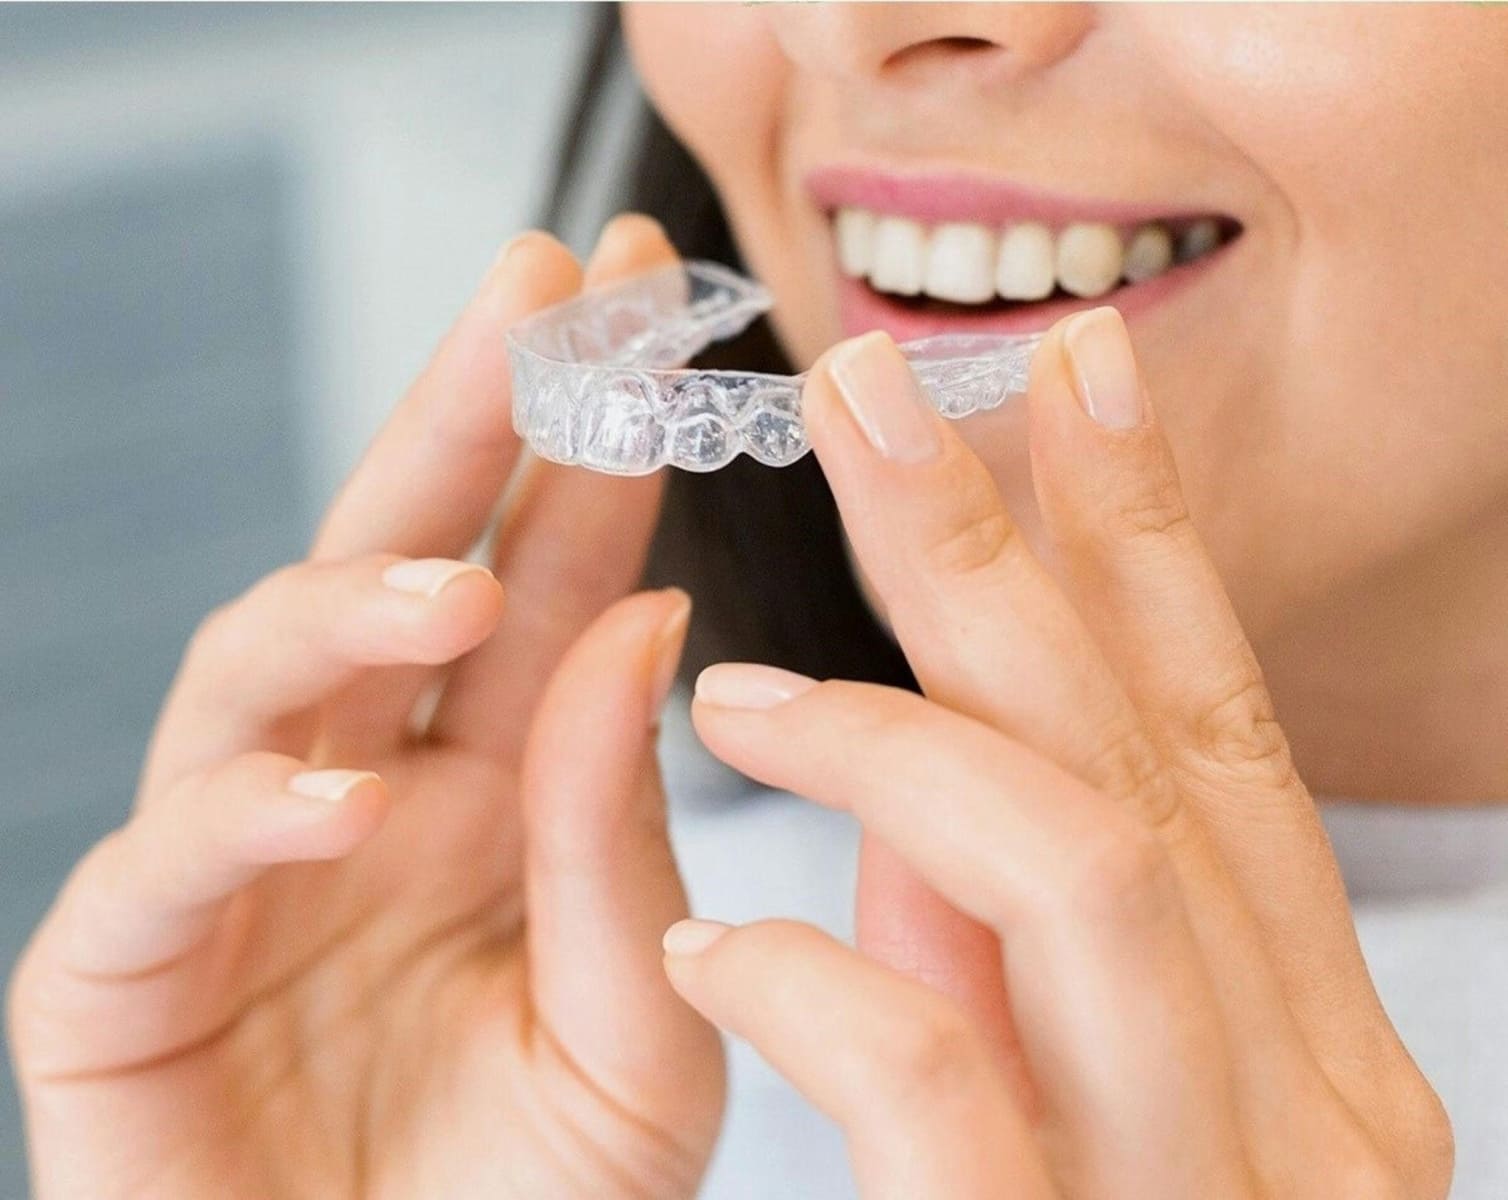 Smile Confidently with Invisalign: Dental Concepts' Invisible Braces in Poole, Andover, Whitchurch, and Southampton